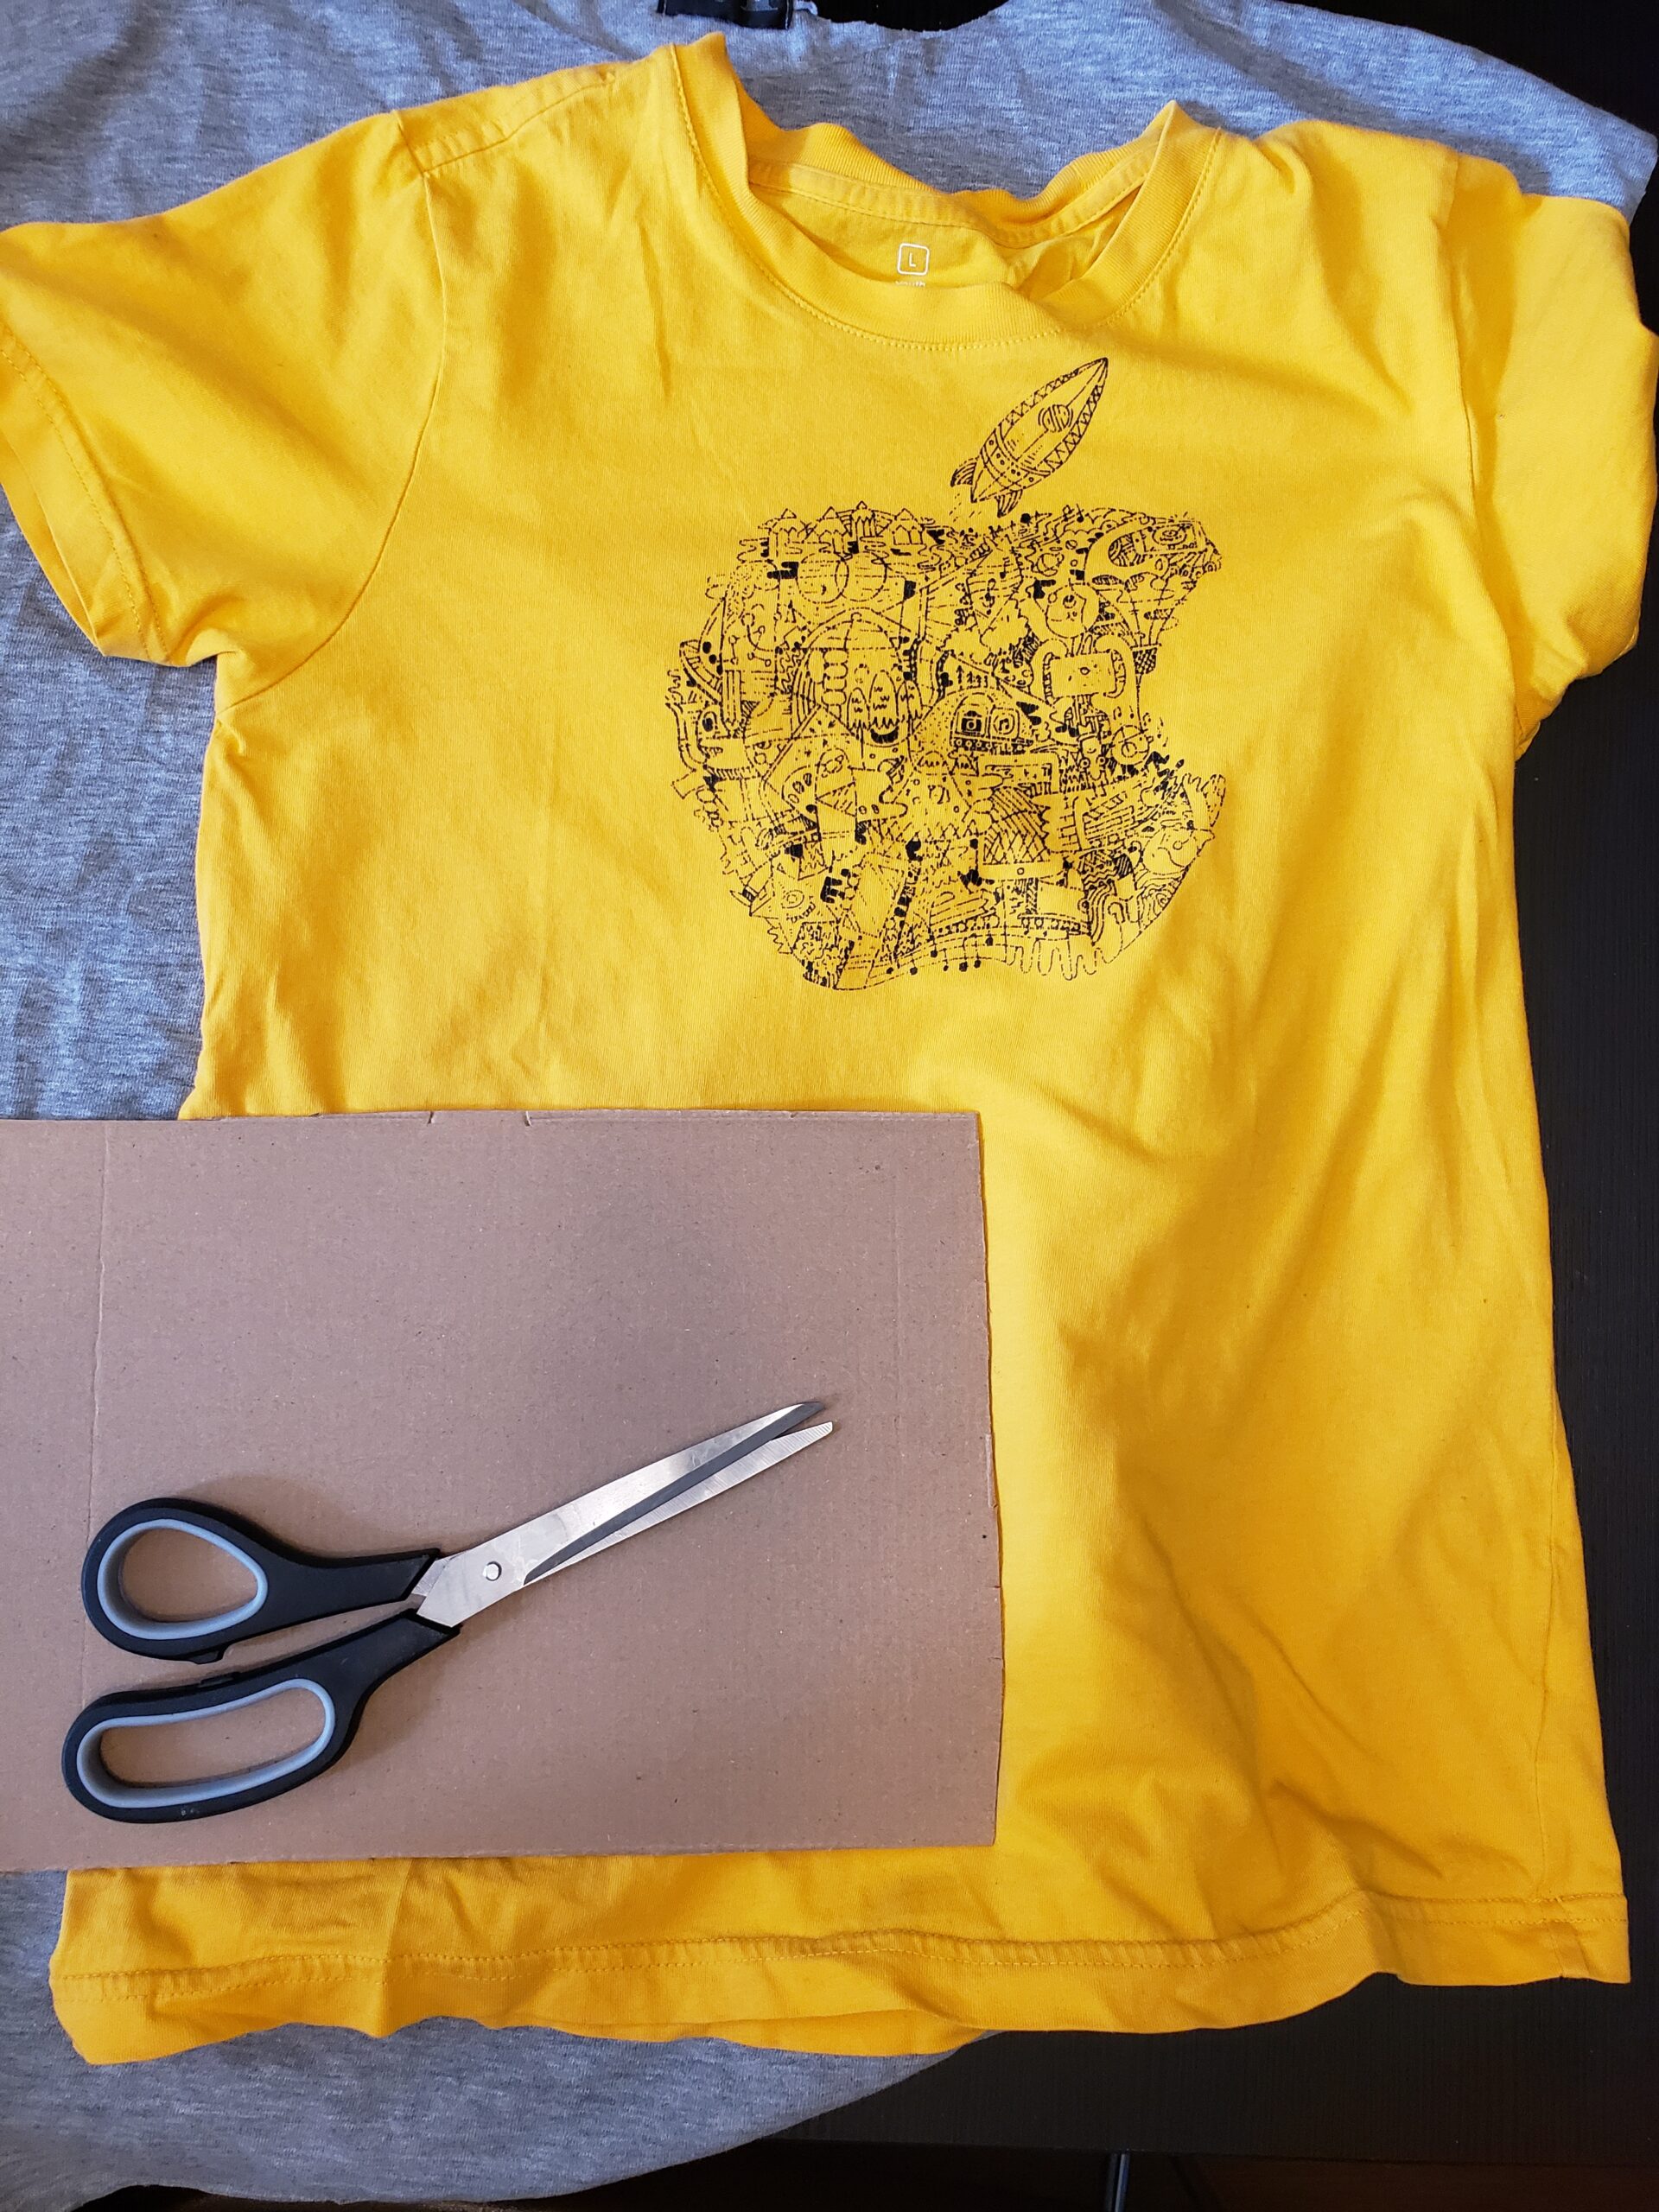 A yellow t-shirt, a rectangular piece of cardboard and a pair of scissors are laid on a table